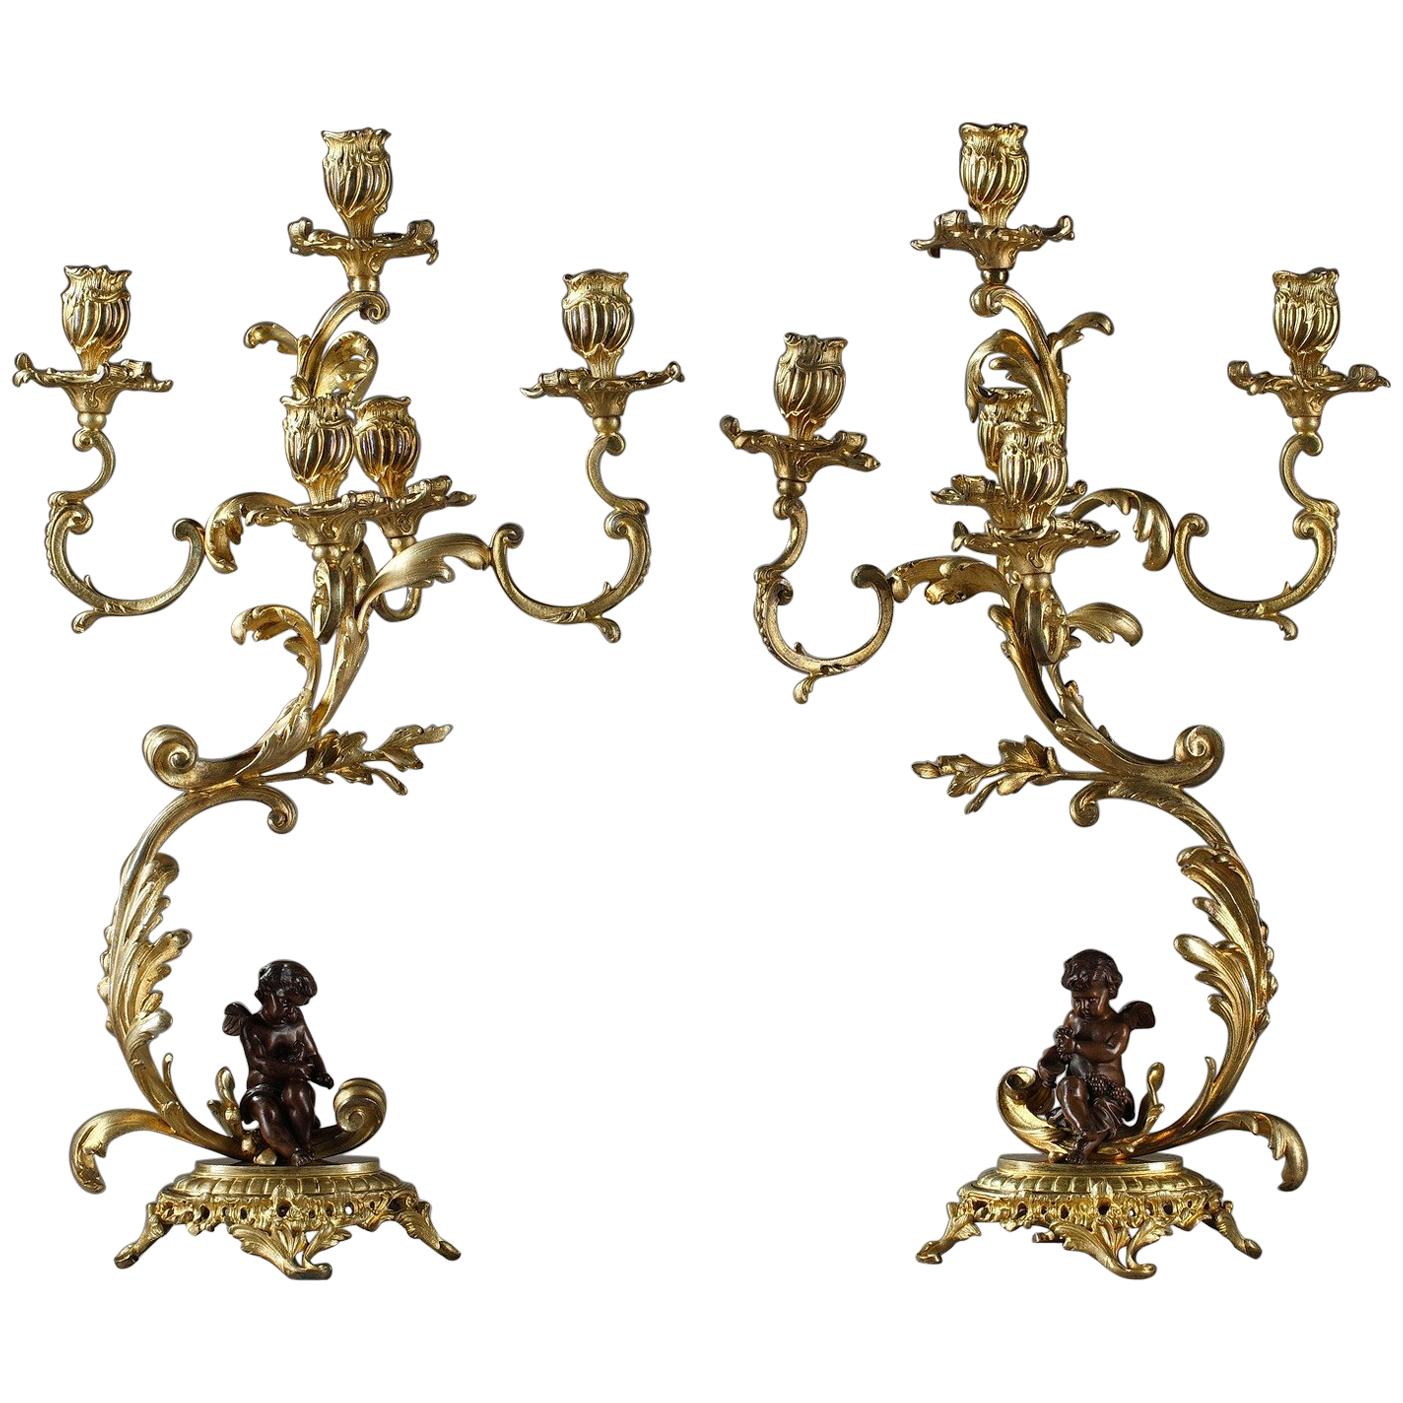 Pair of 19th Century Figural Bronze Candelabra Lamps